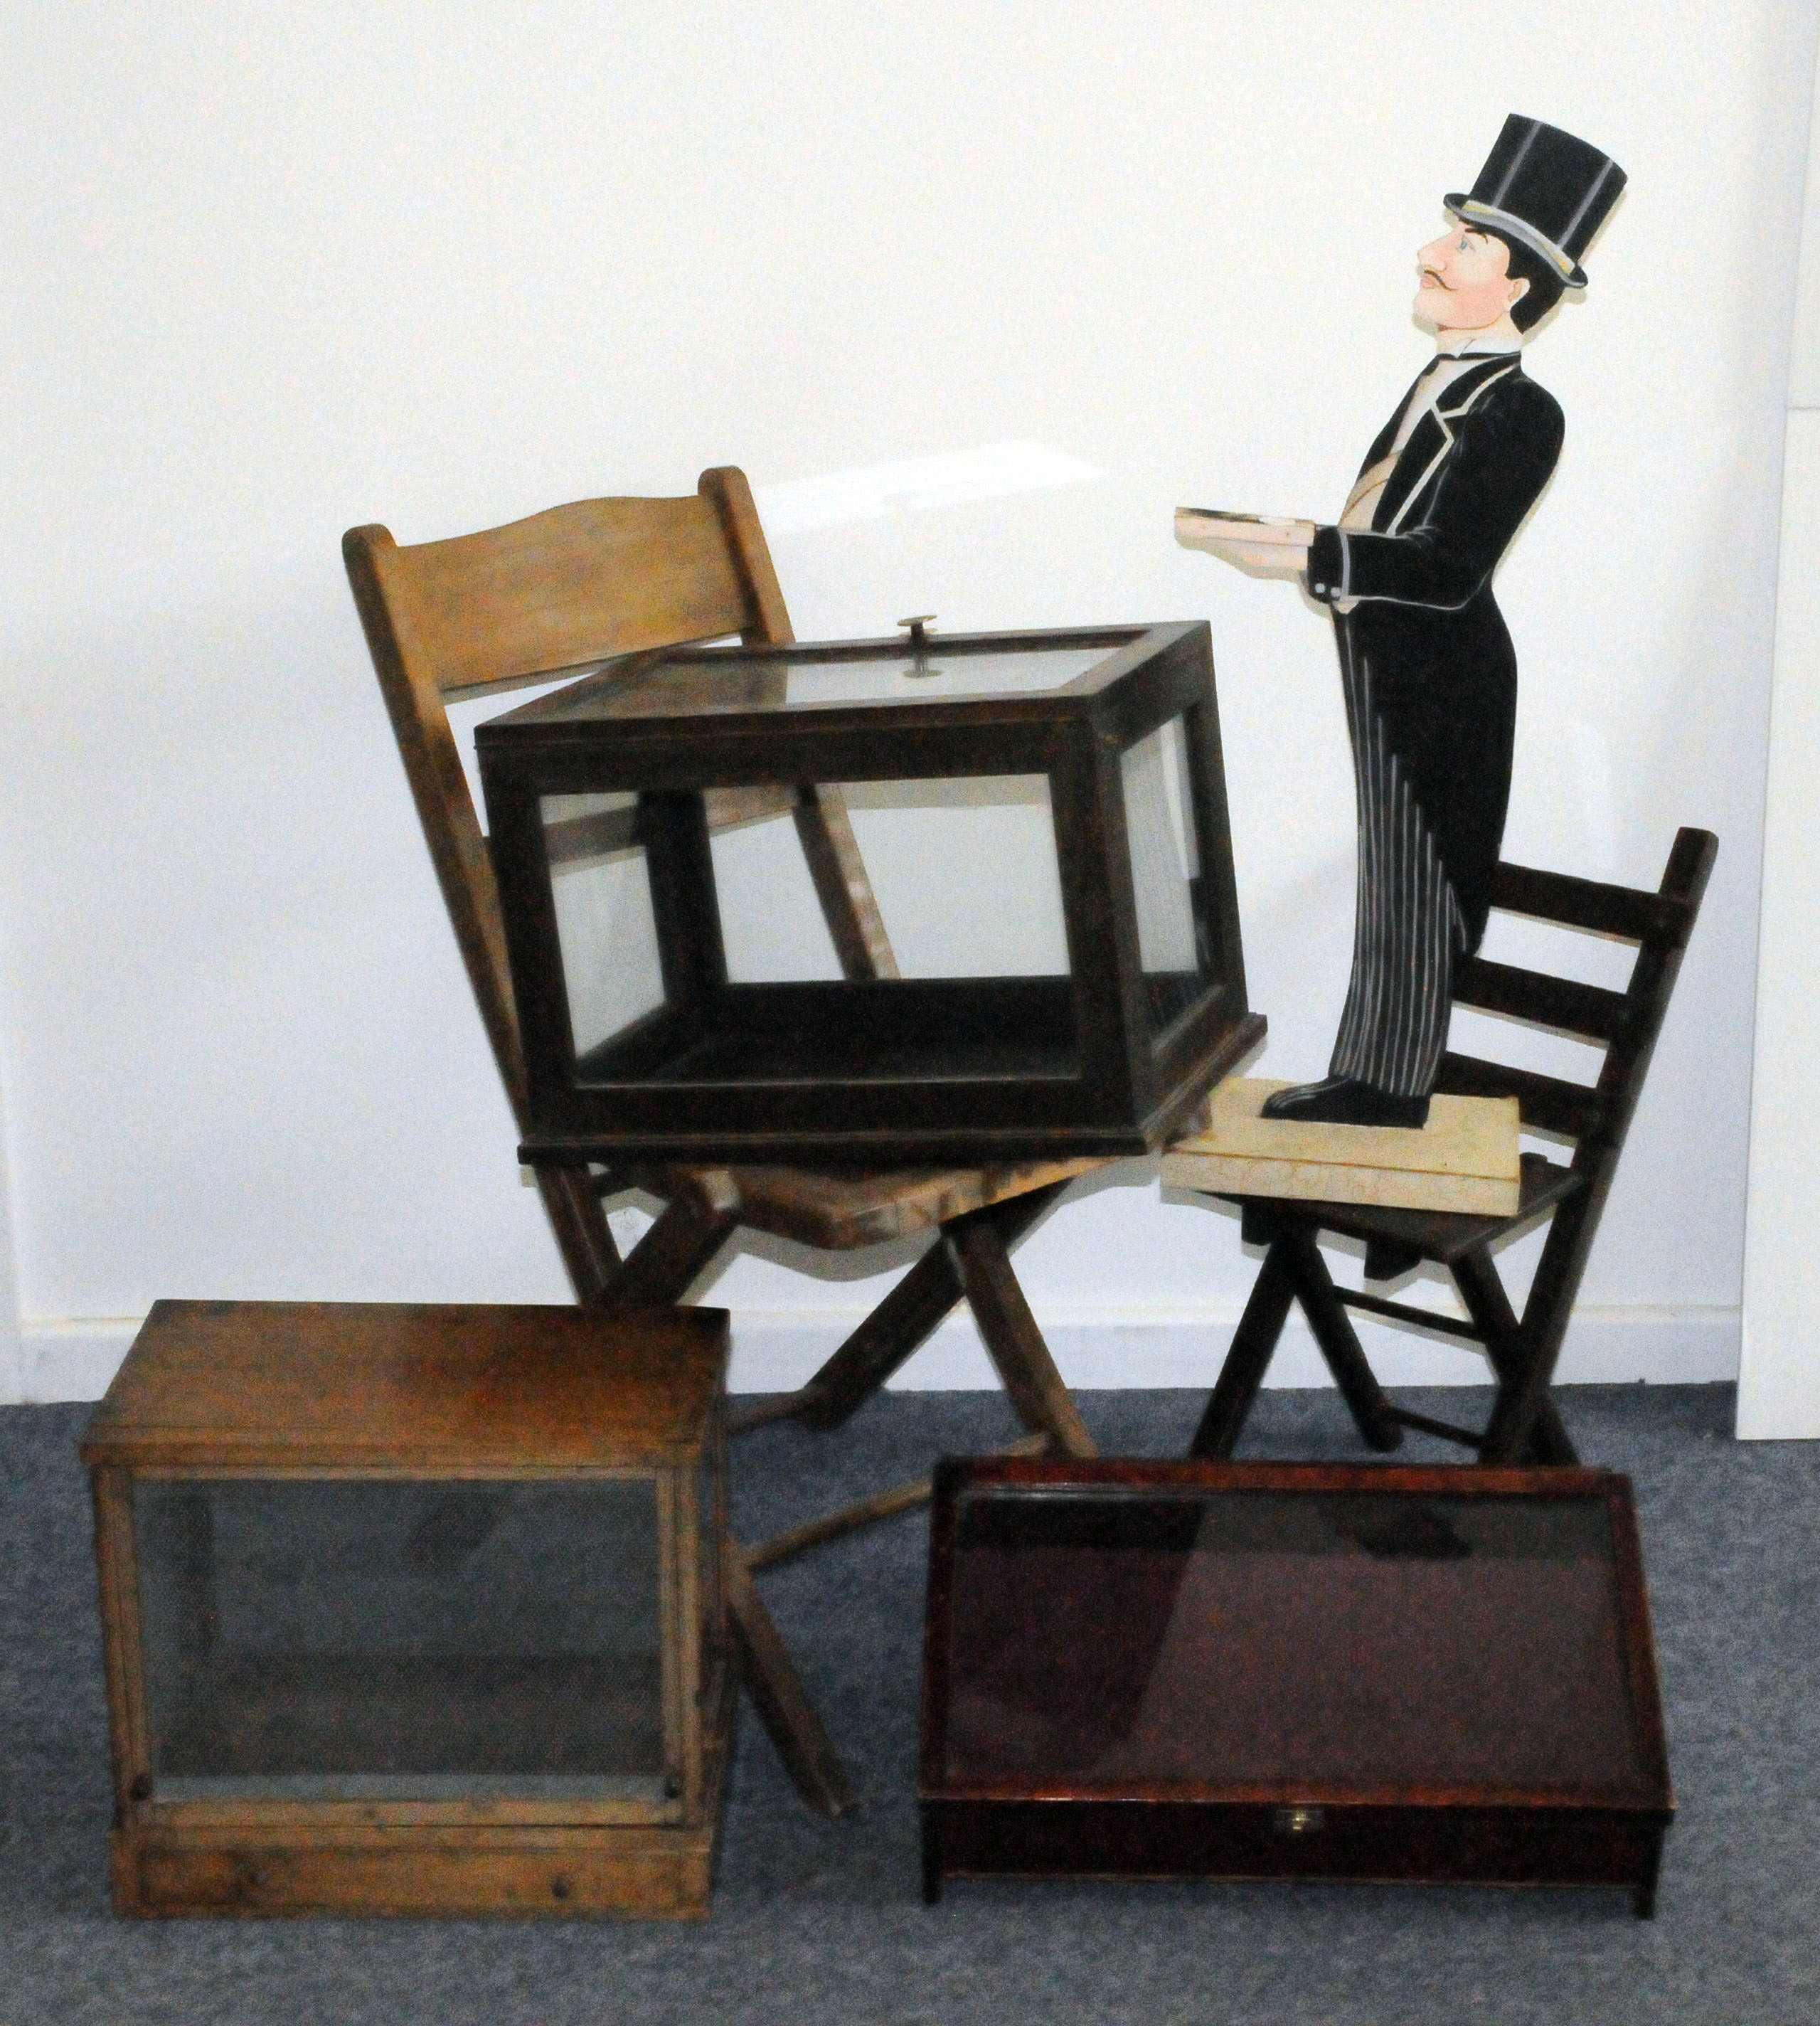 A vintage painted waiter, lacking tray, together with two folding chairs, a table top display, a